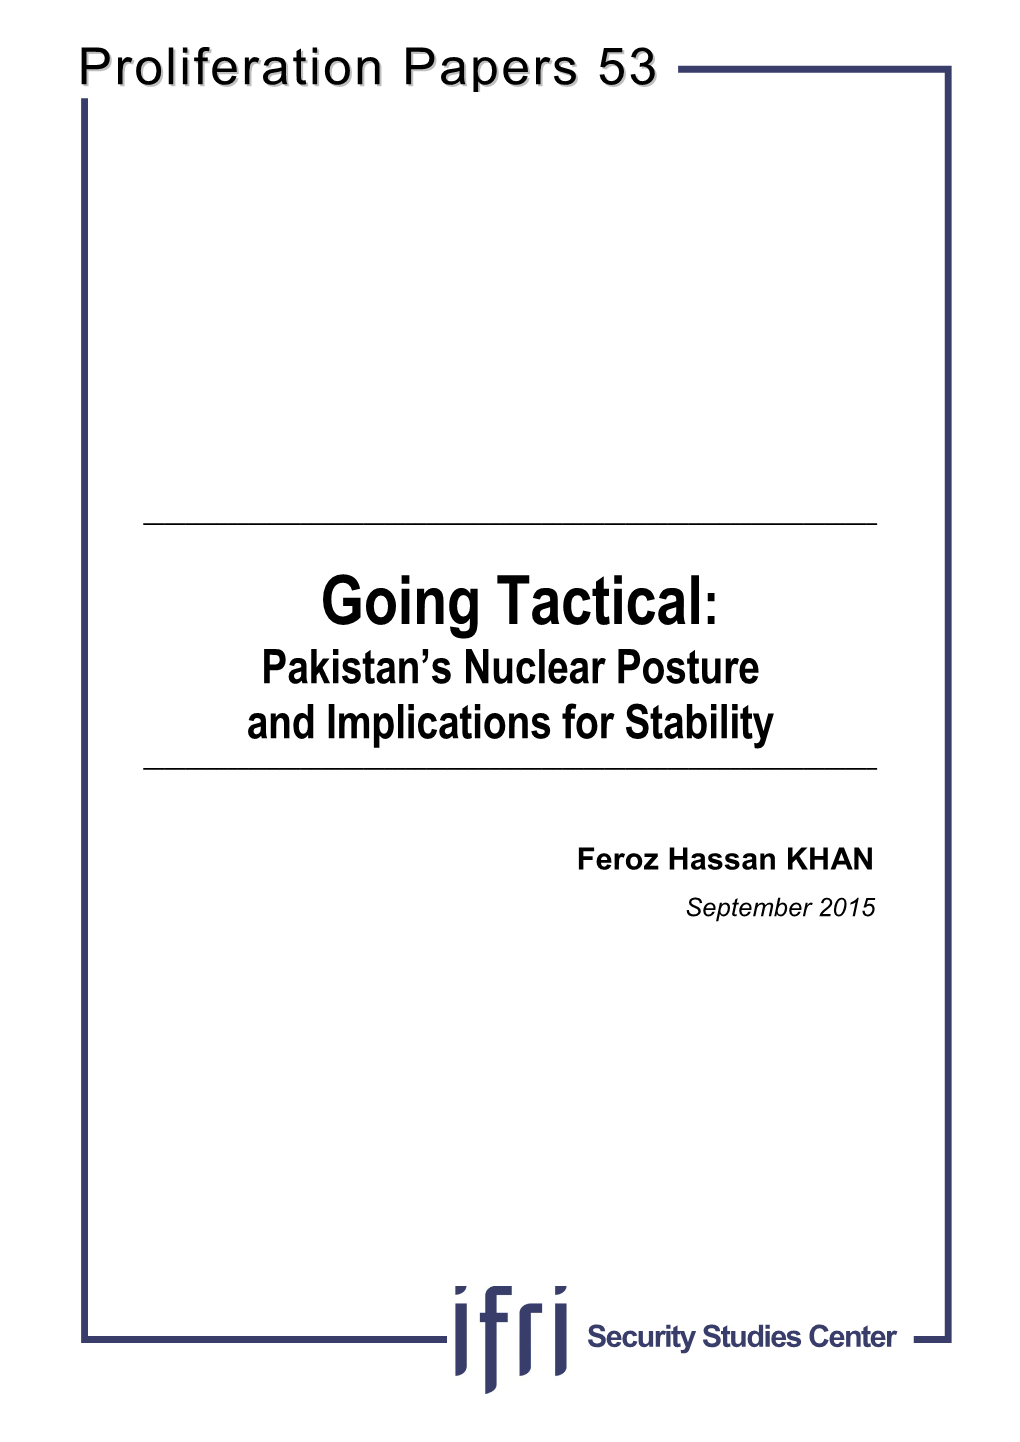 Going Tactical: Pakistan’S Nuclear Posture and Implications for Stability ______